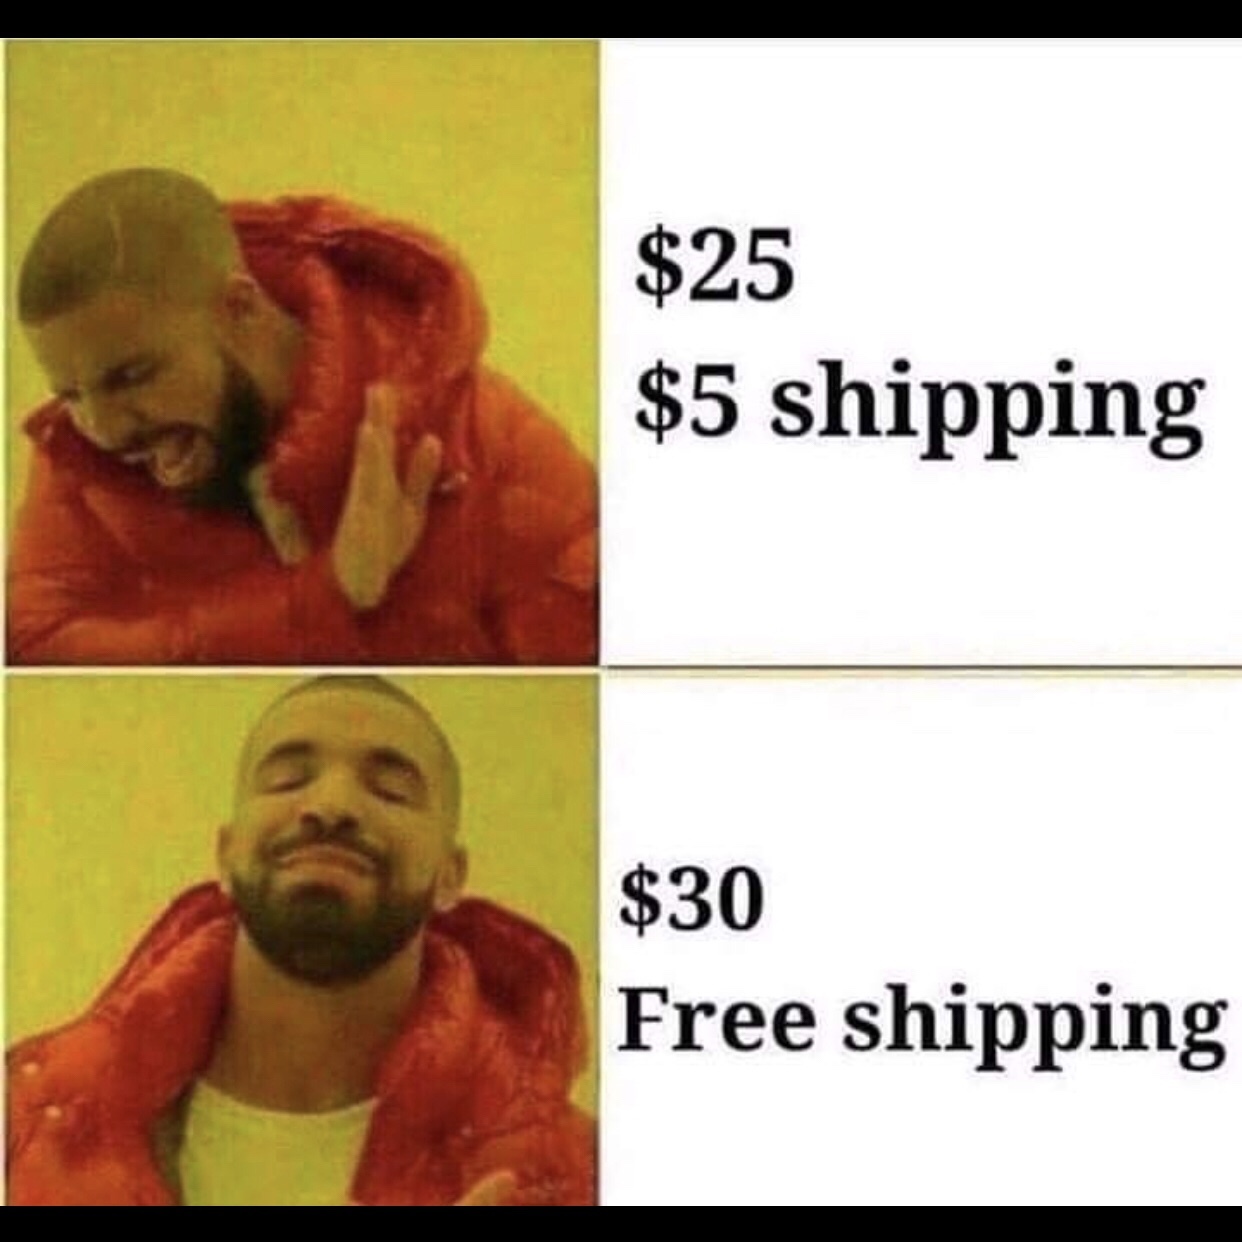 FREE shipping benefits in the body - meme